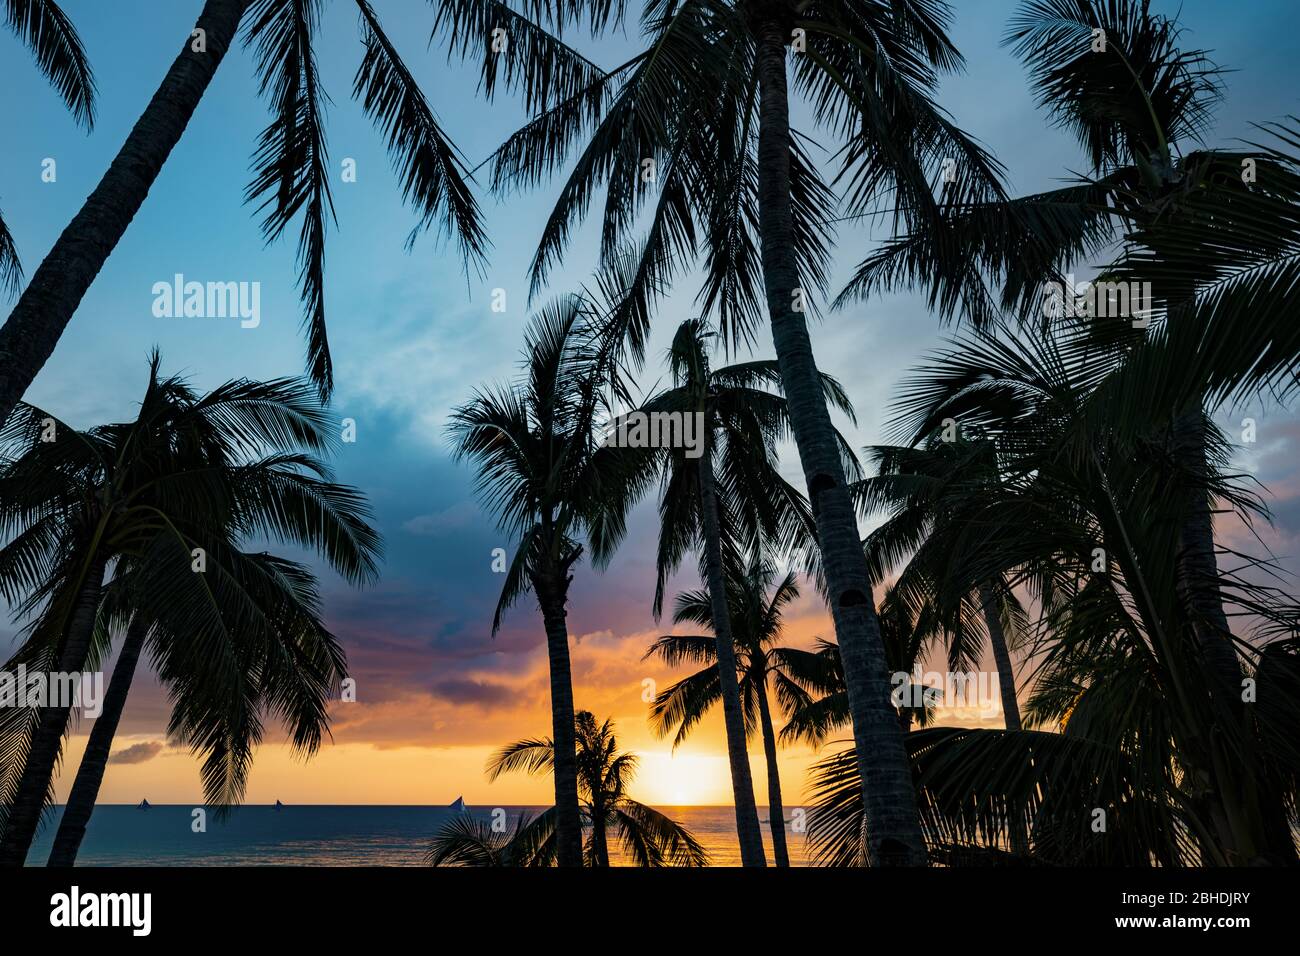 (Selective focus) Stunning view of a dramatic sunset in the background and the silhouette of coconut palm trees in the foreground. Stock Photo